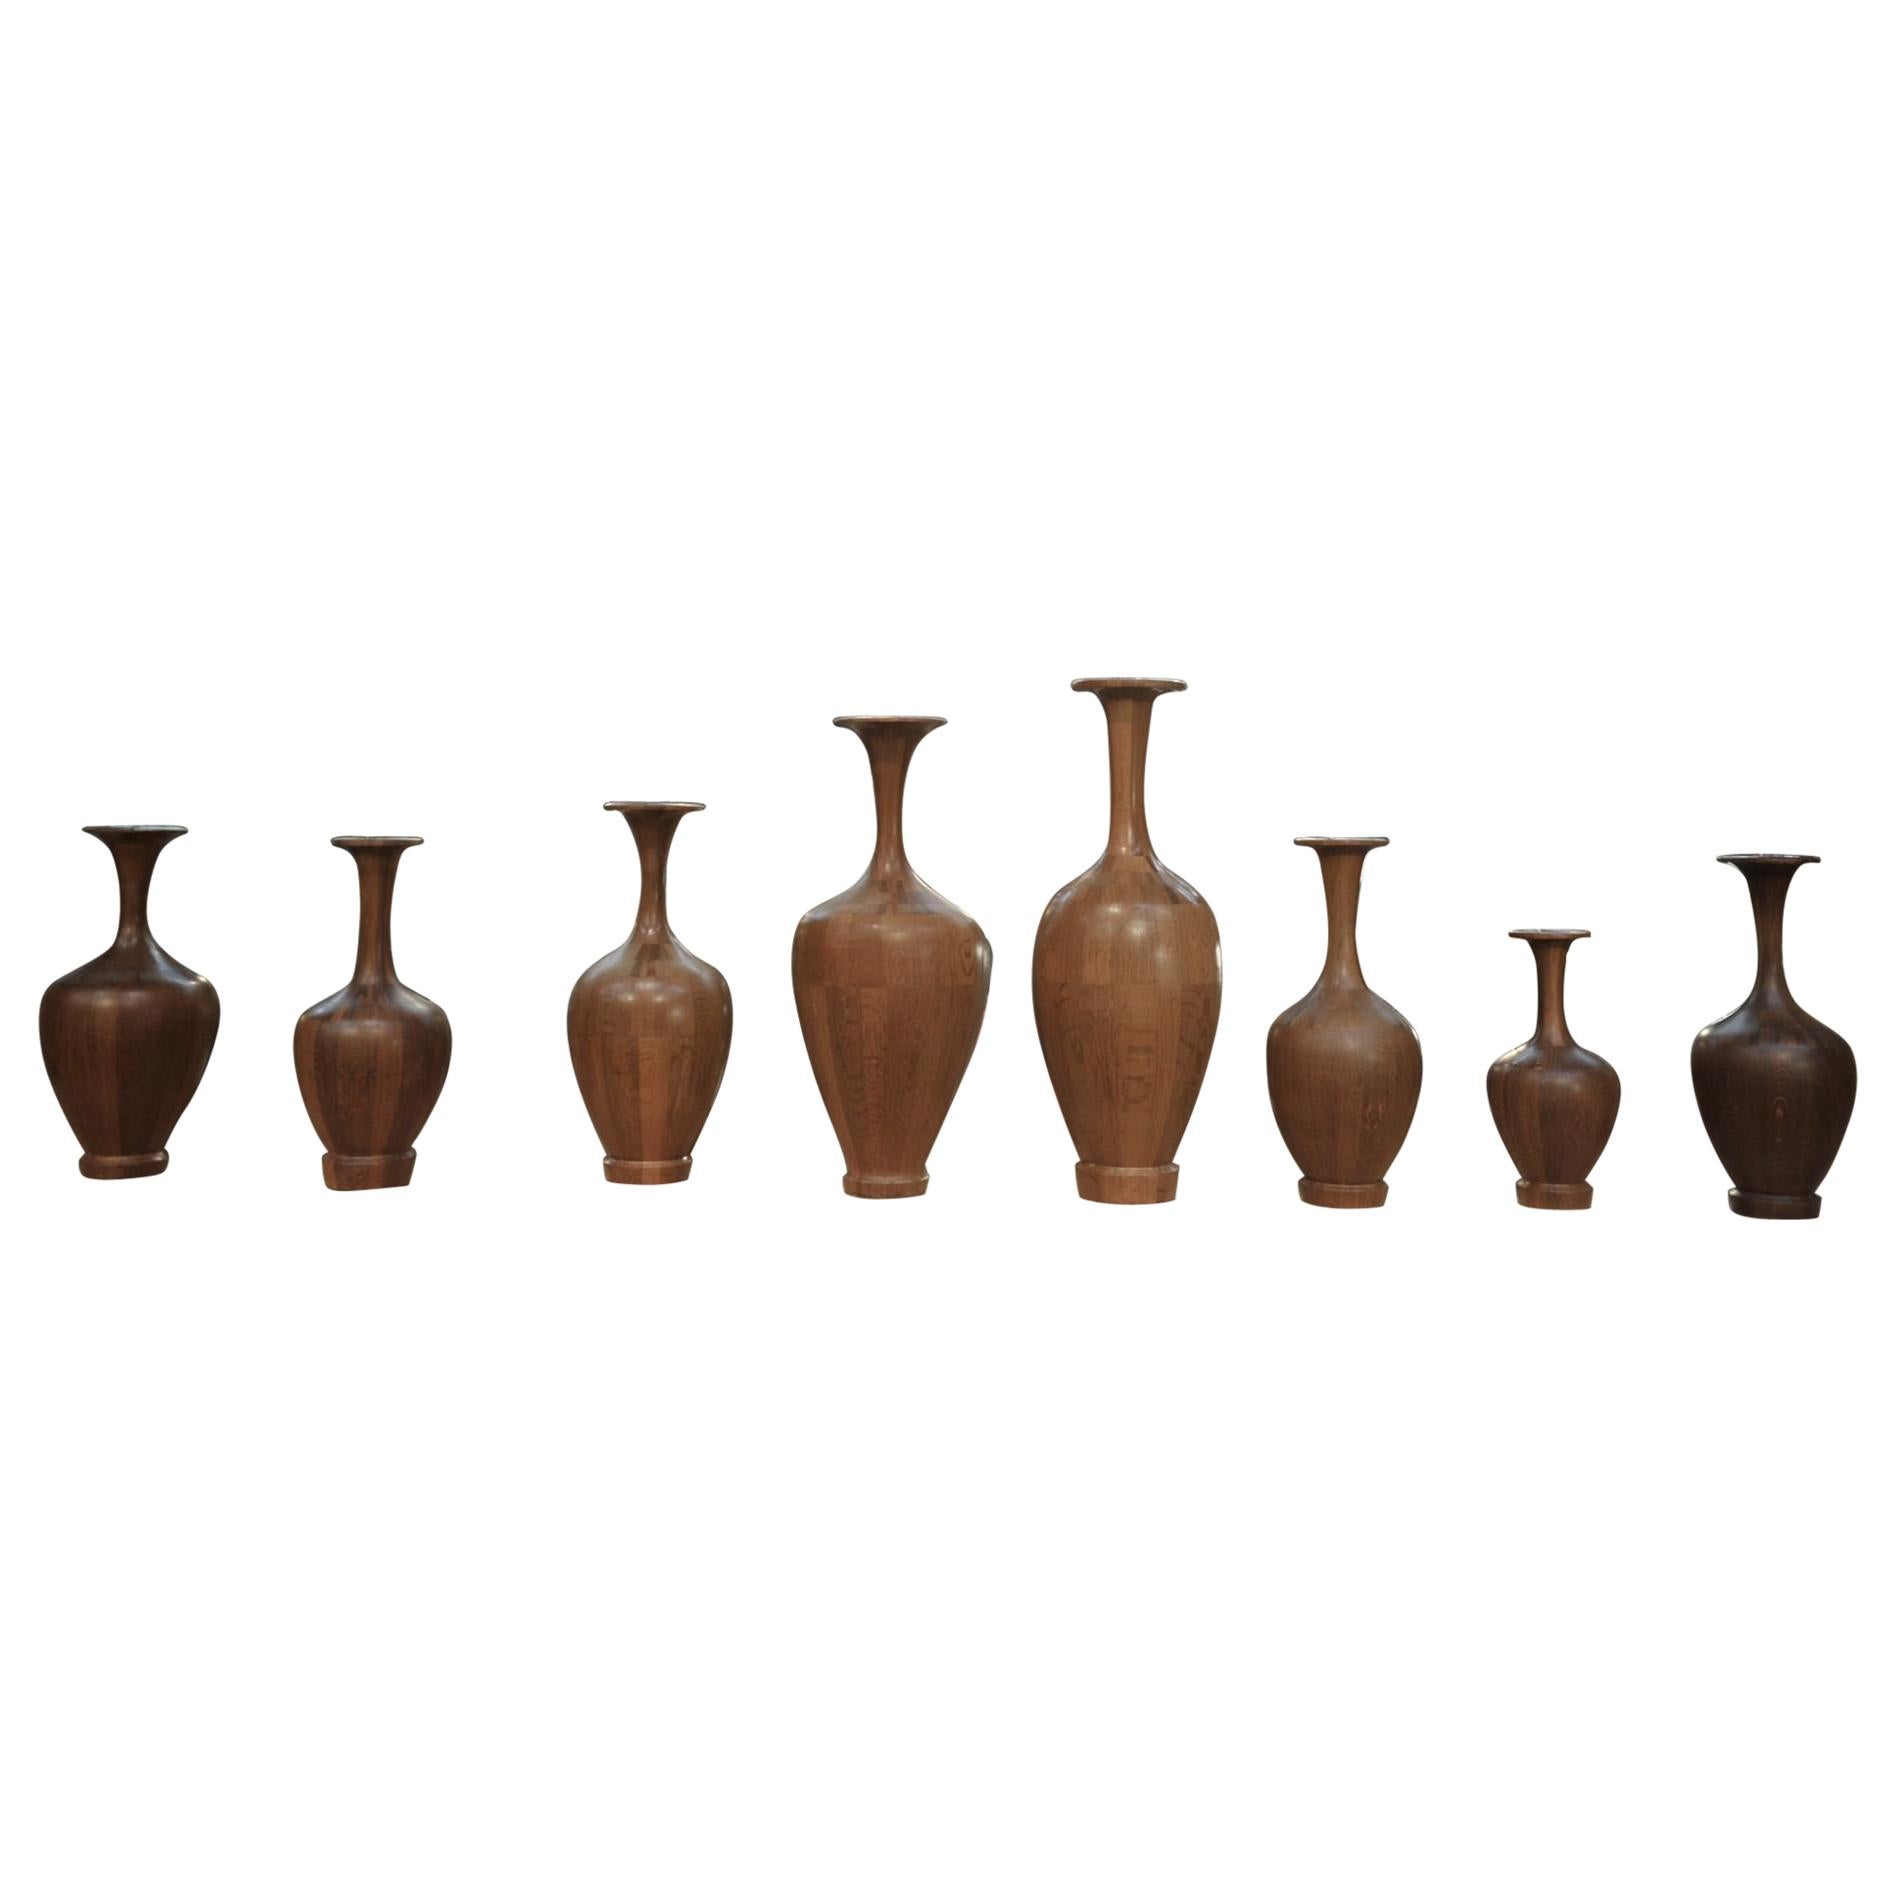 Set of Height Timber Vases, De Coene Frères, 1930s For Sale